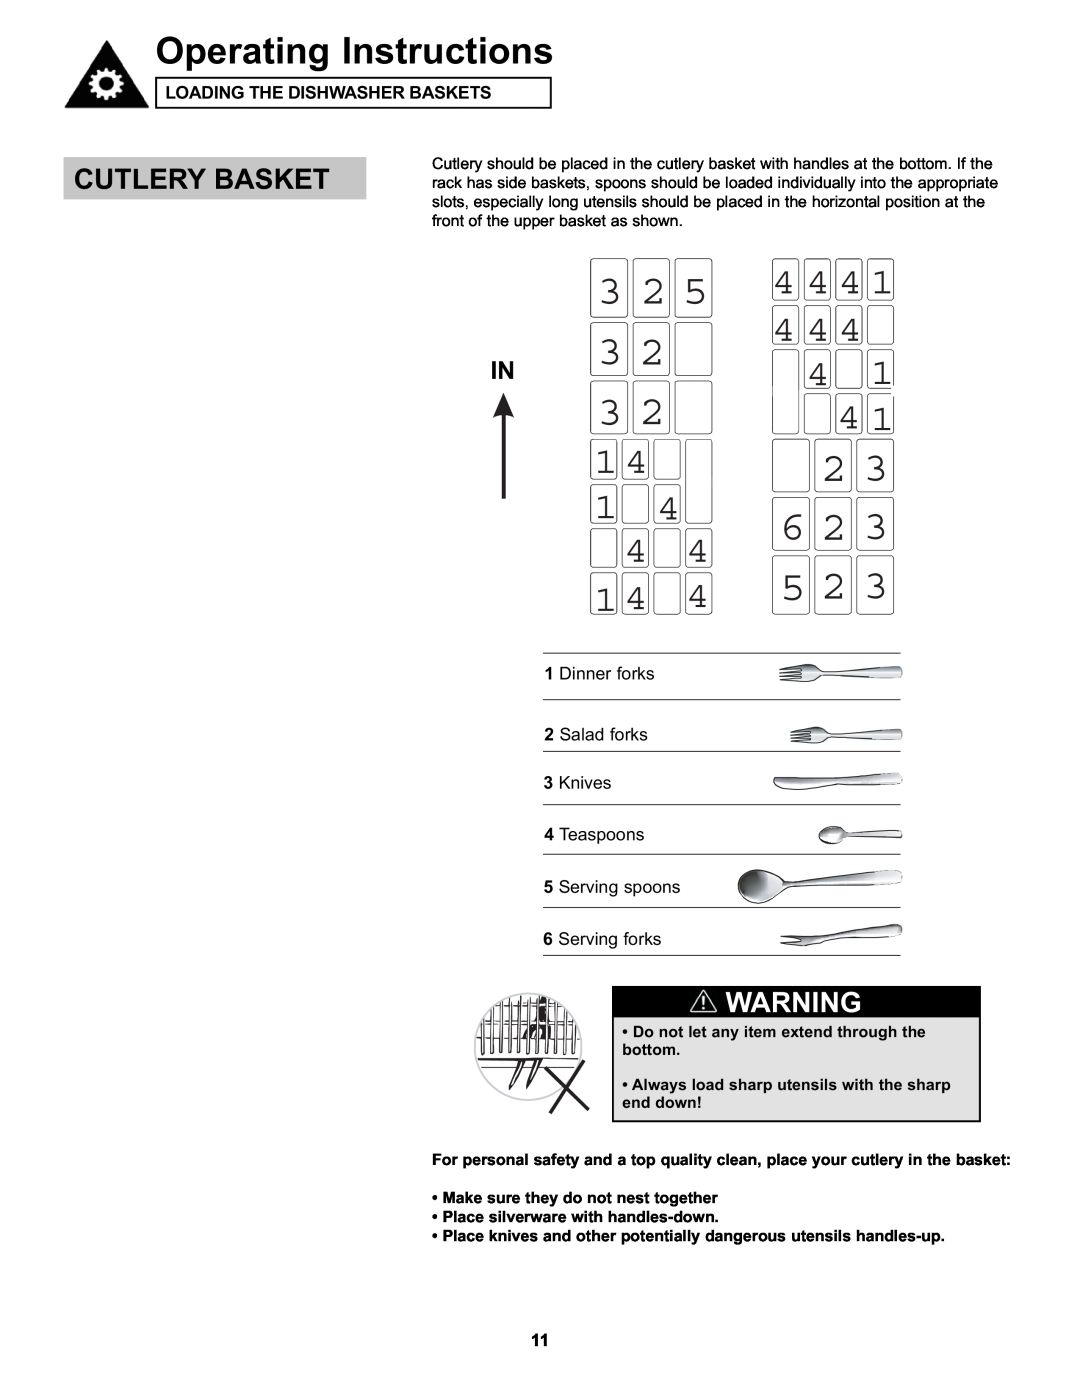 Danby DDW611WLED manual 4441, Operating Instructions, Do not let any item extend through the bottom 